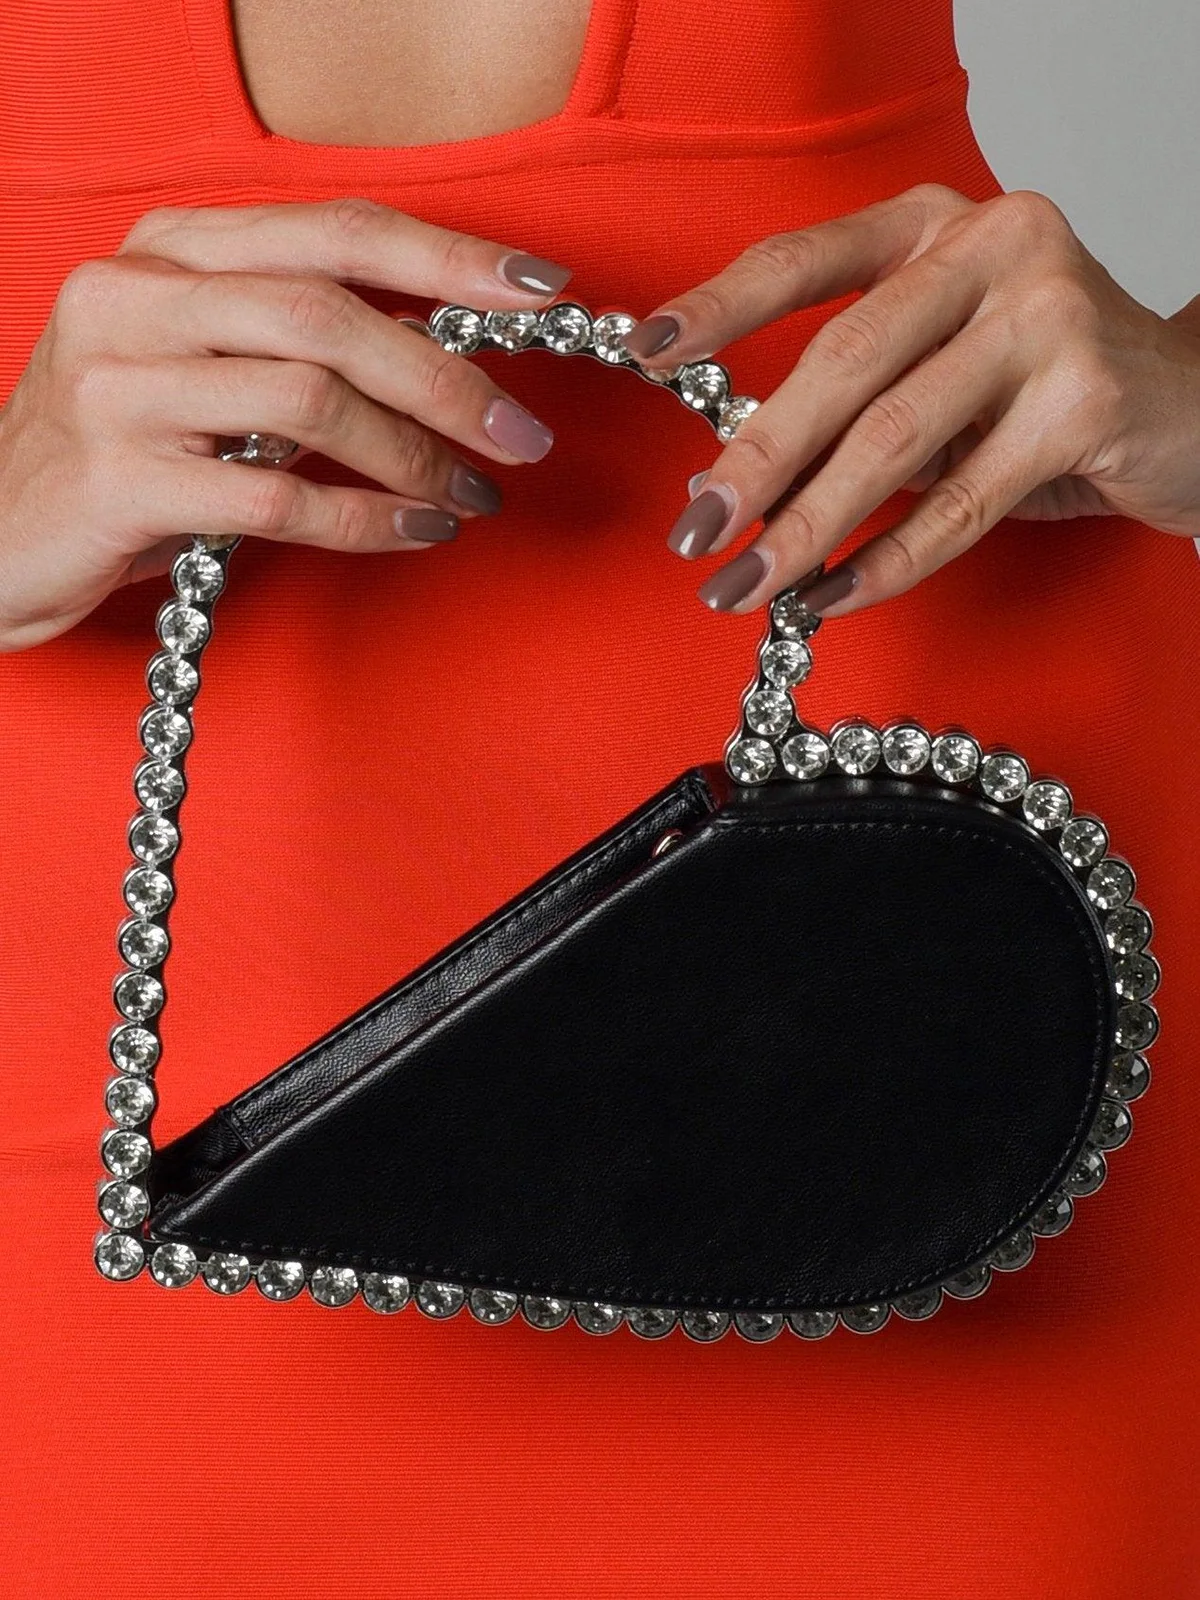 Banquet Party Heart Shaped Diamond Leather Ladies Clutch Elegant